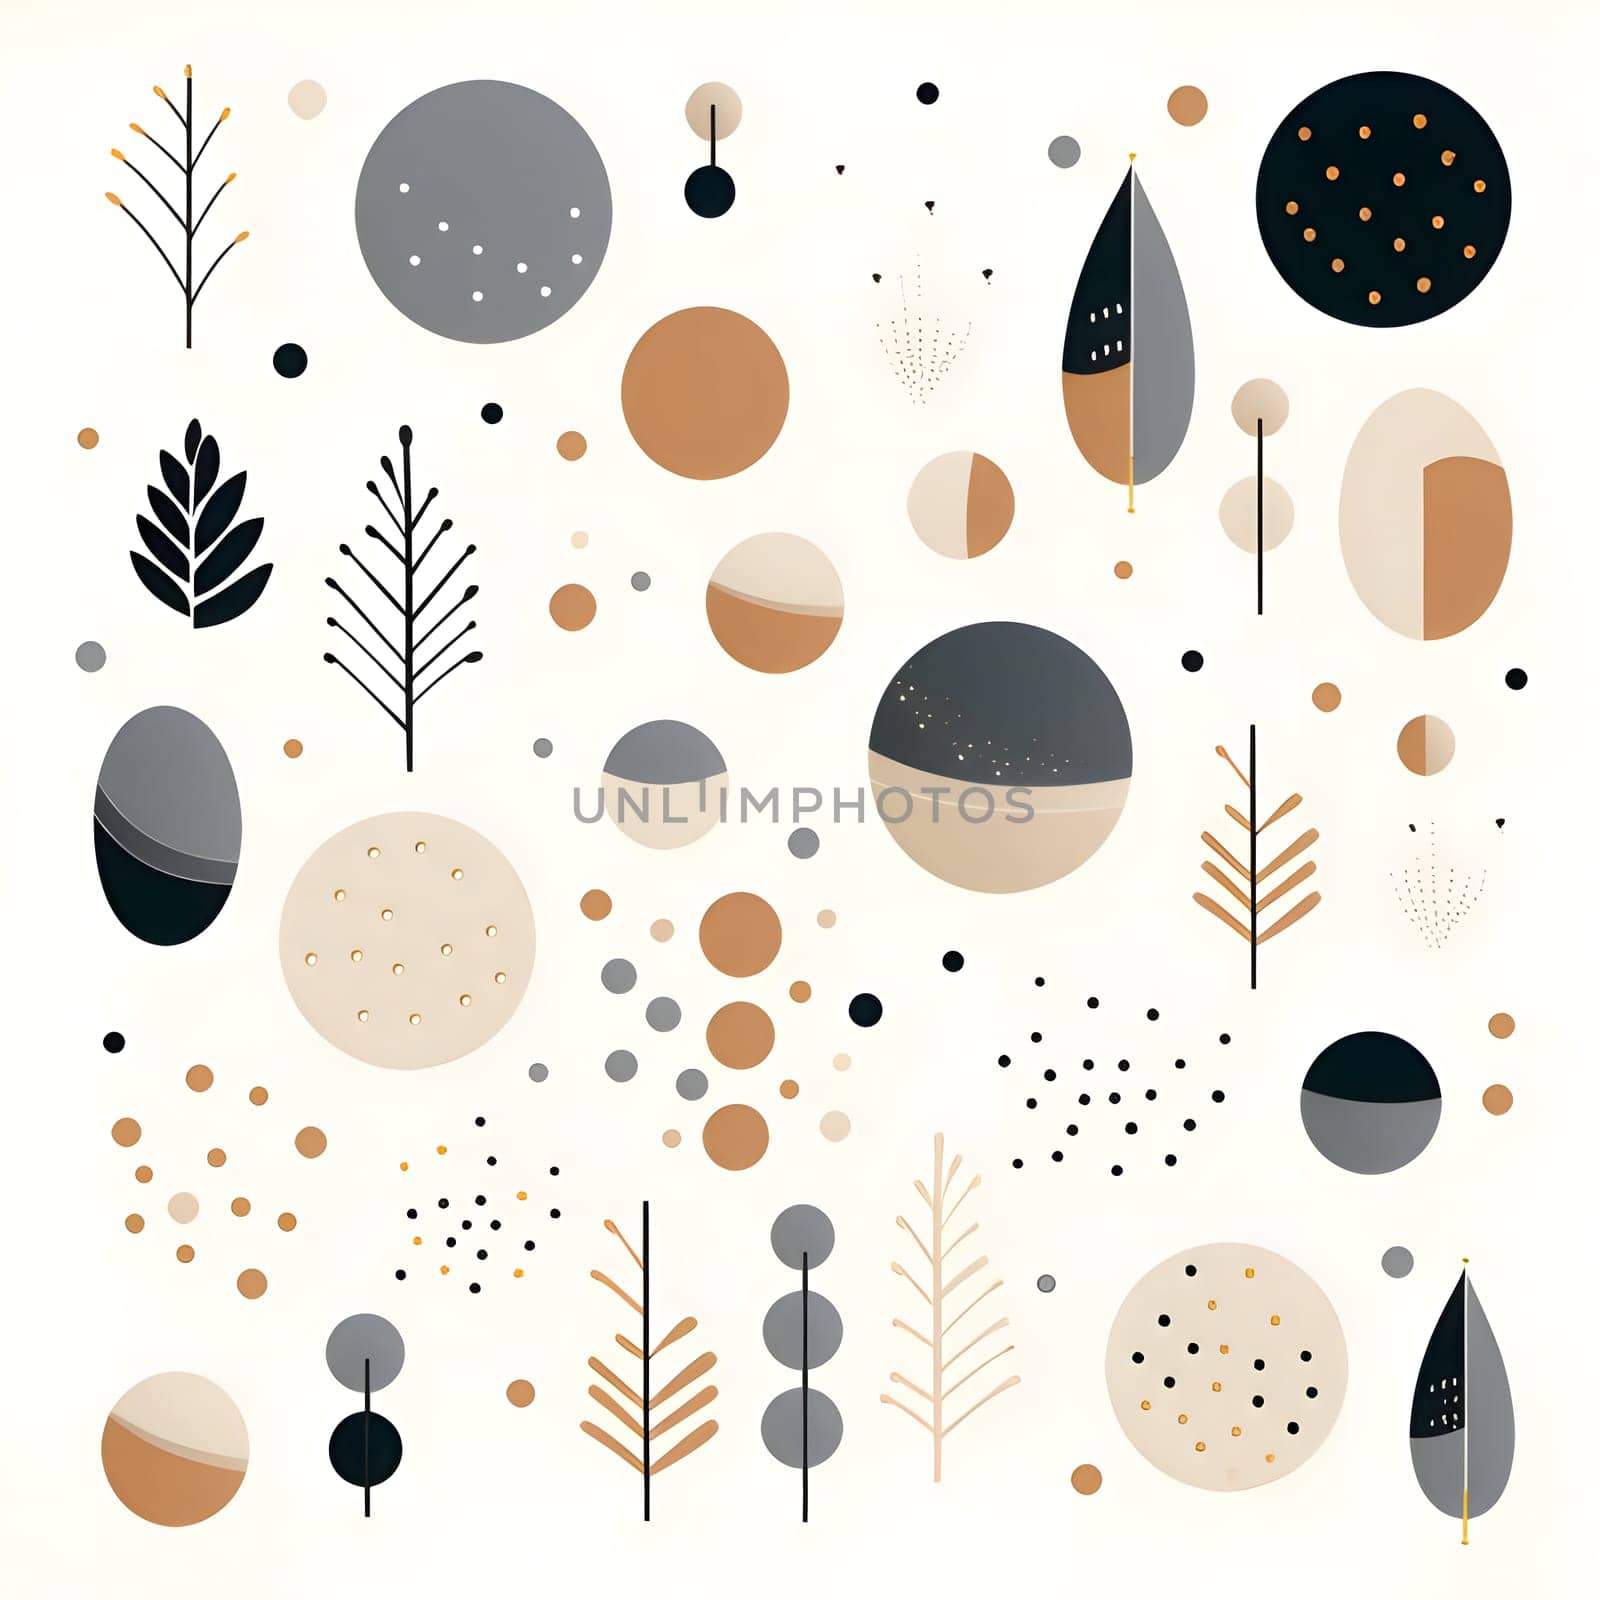 Patterns and banners backgrounds: Seamless pattern with geometric elements. Abstract background with circles, dots and leaves. Vector illustration.